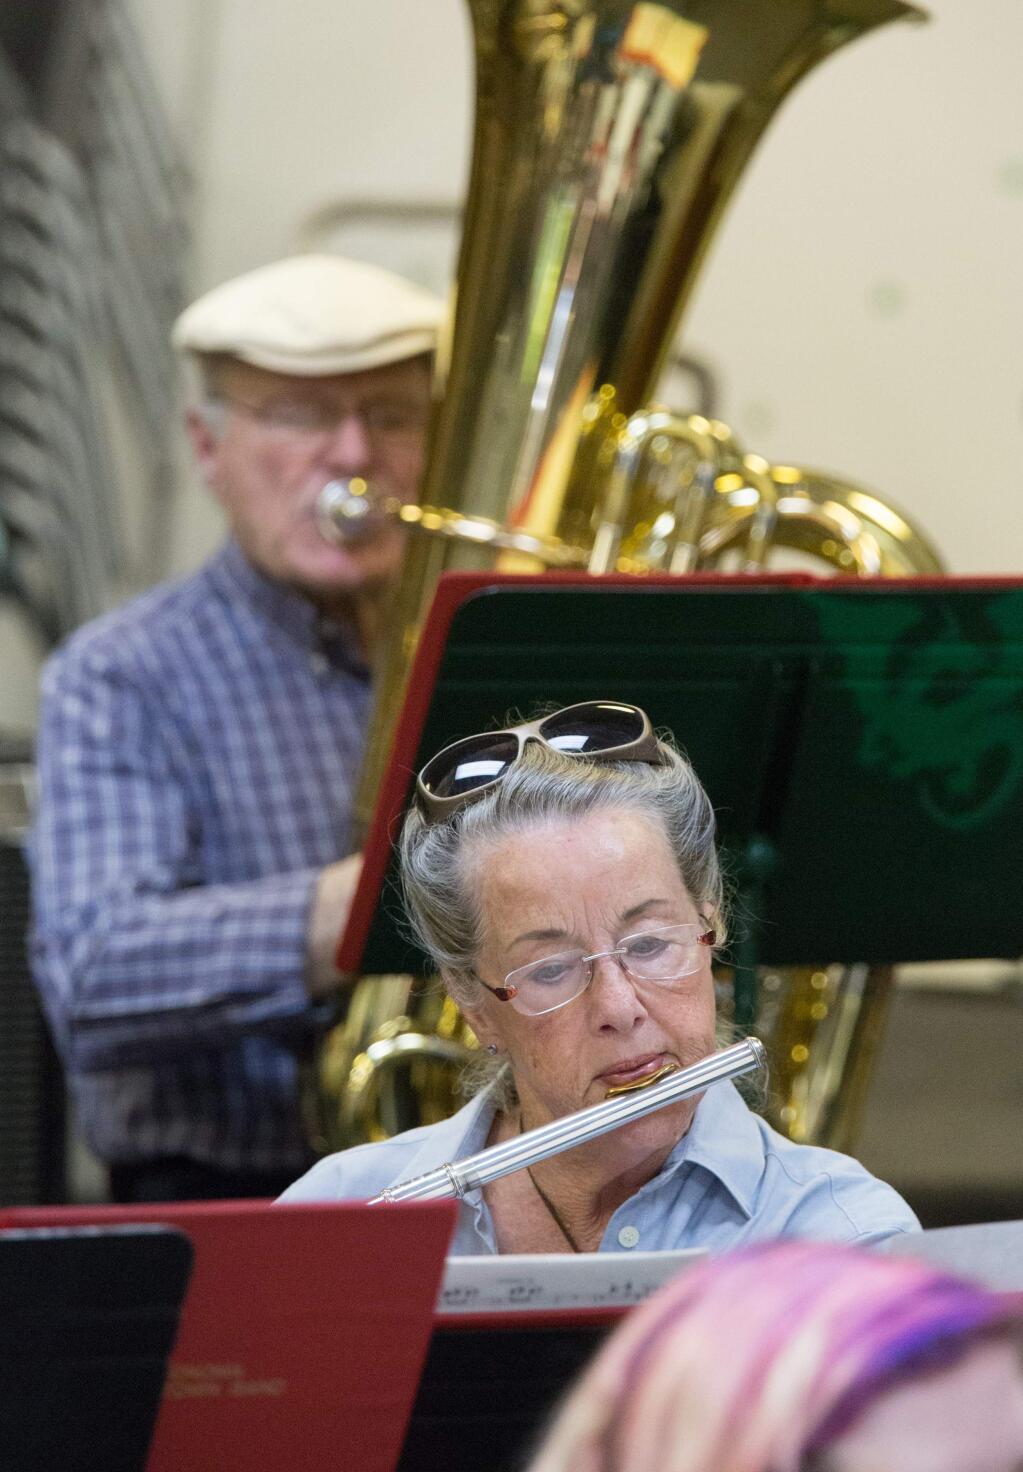 Kim Brown played the flute with fellow members of the Sonoma Hometown Band during their weekly rehearsal at Sonoma High School last year. (Jeremy Portje/Press Democrat)